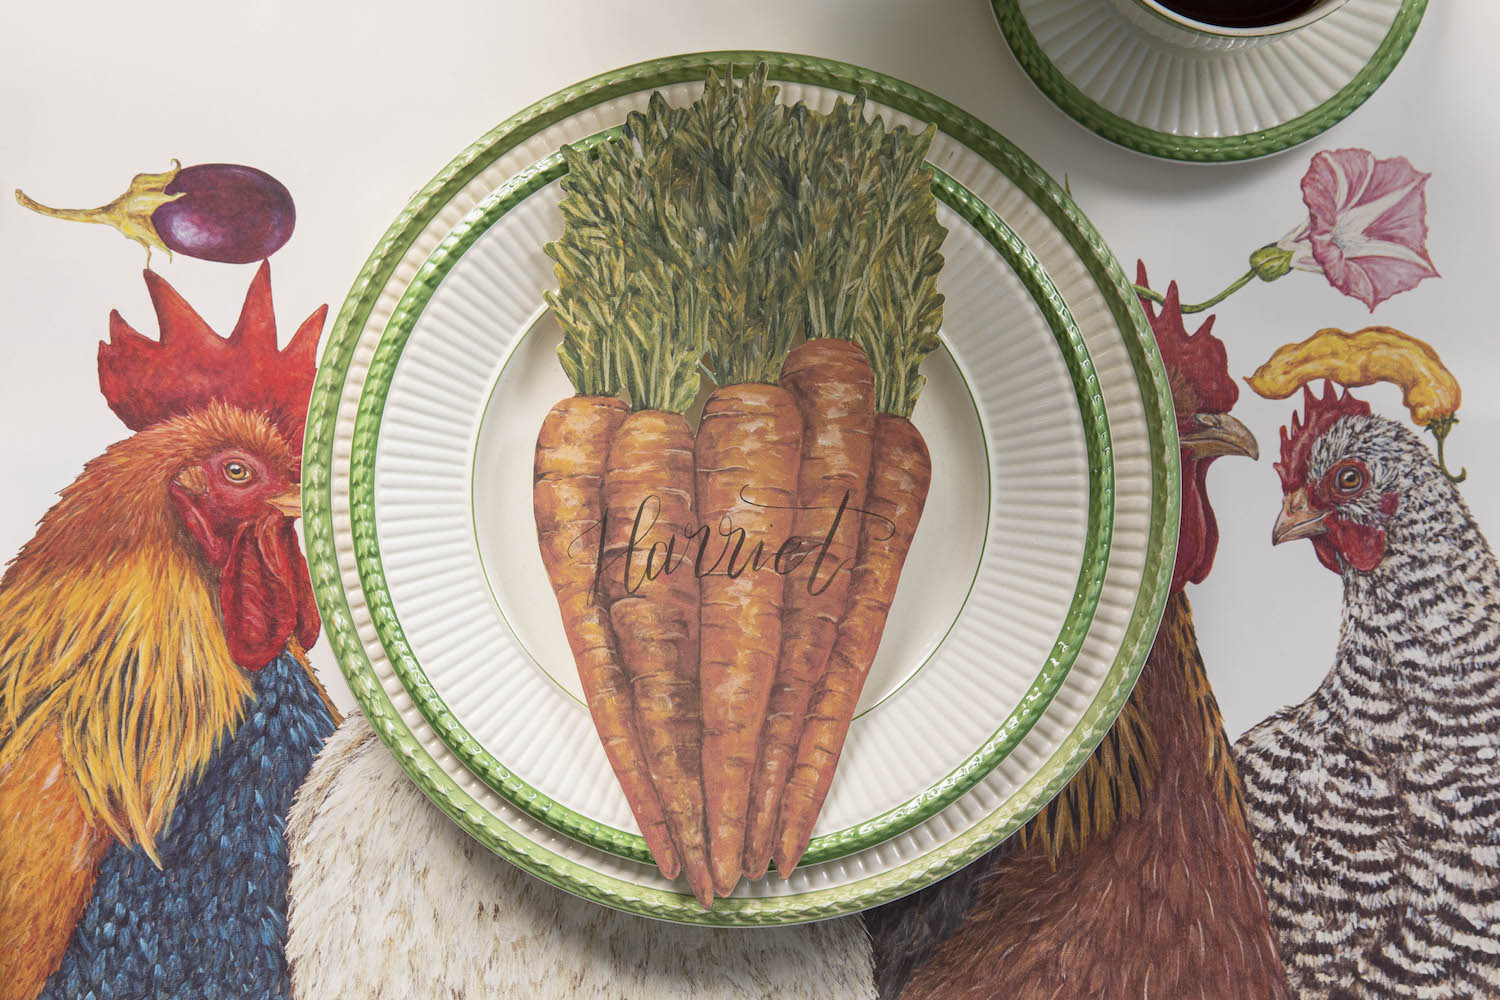 A Carrots Table Accent labeled &quot;Harriet&quot; resting on the plate of a rustic place setting, from above.